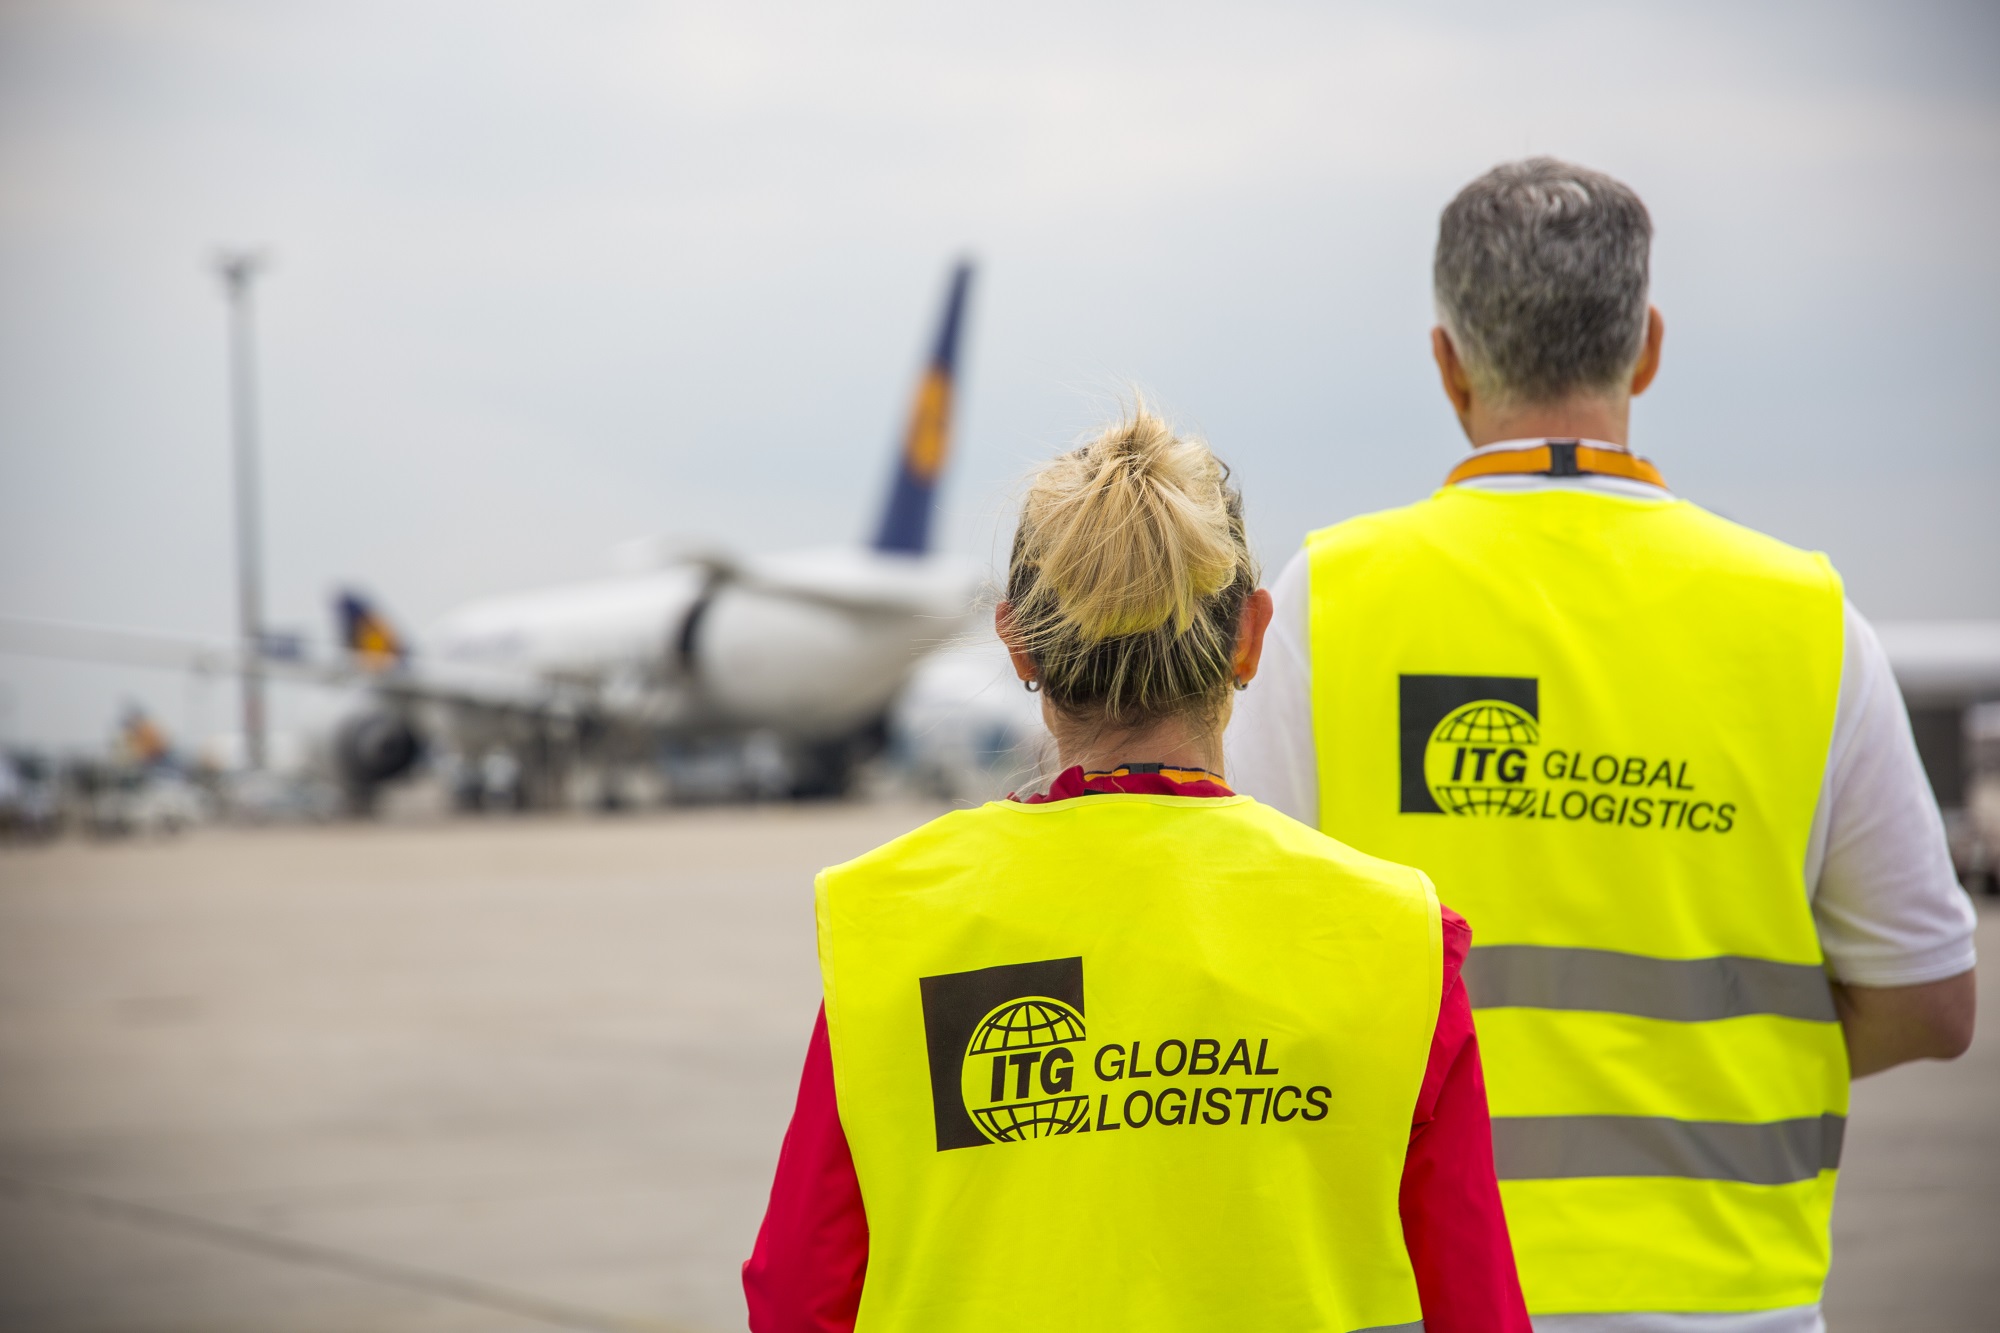 ITG global logistics personell in airport.